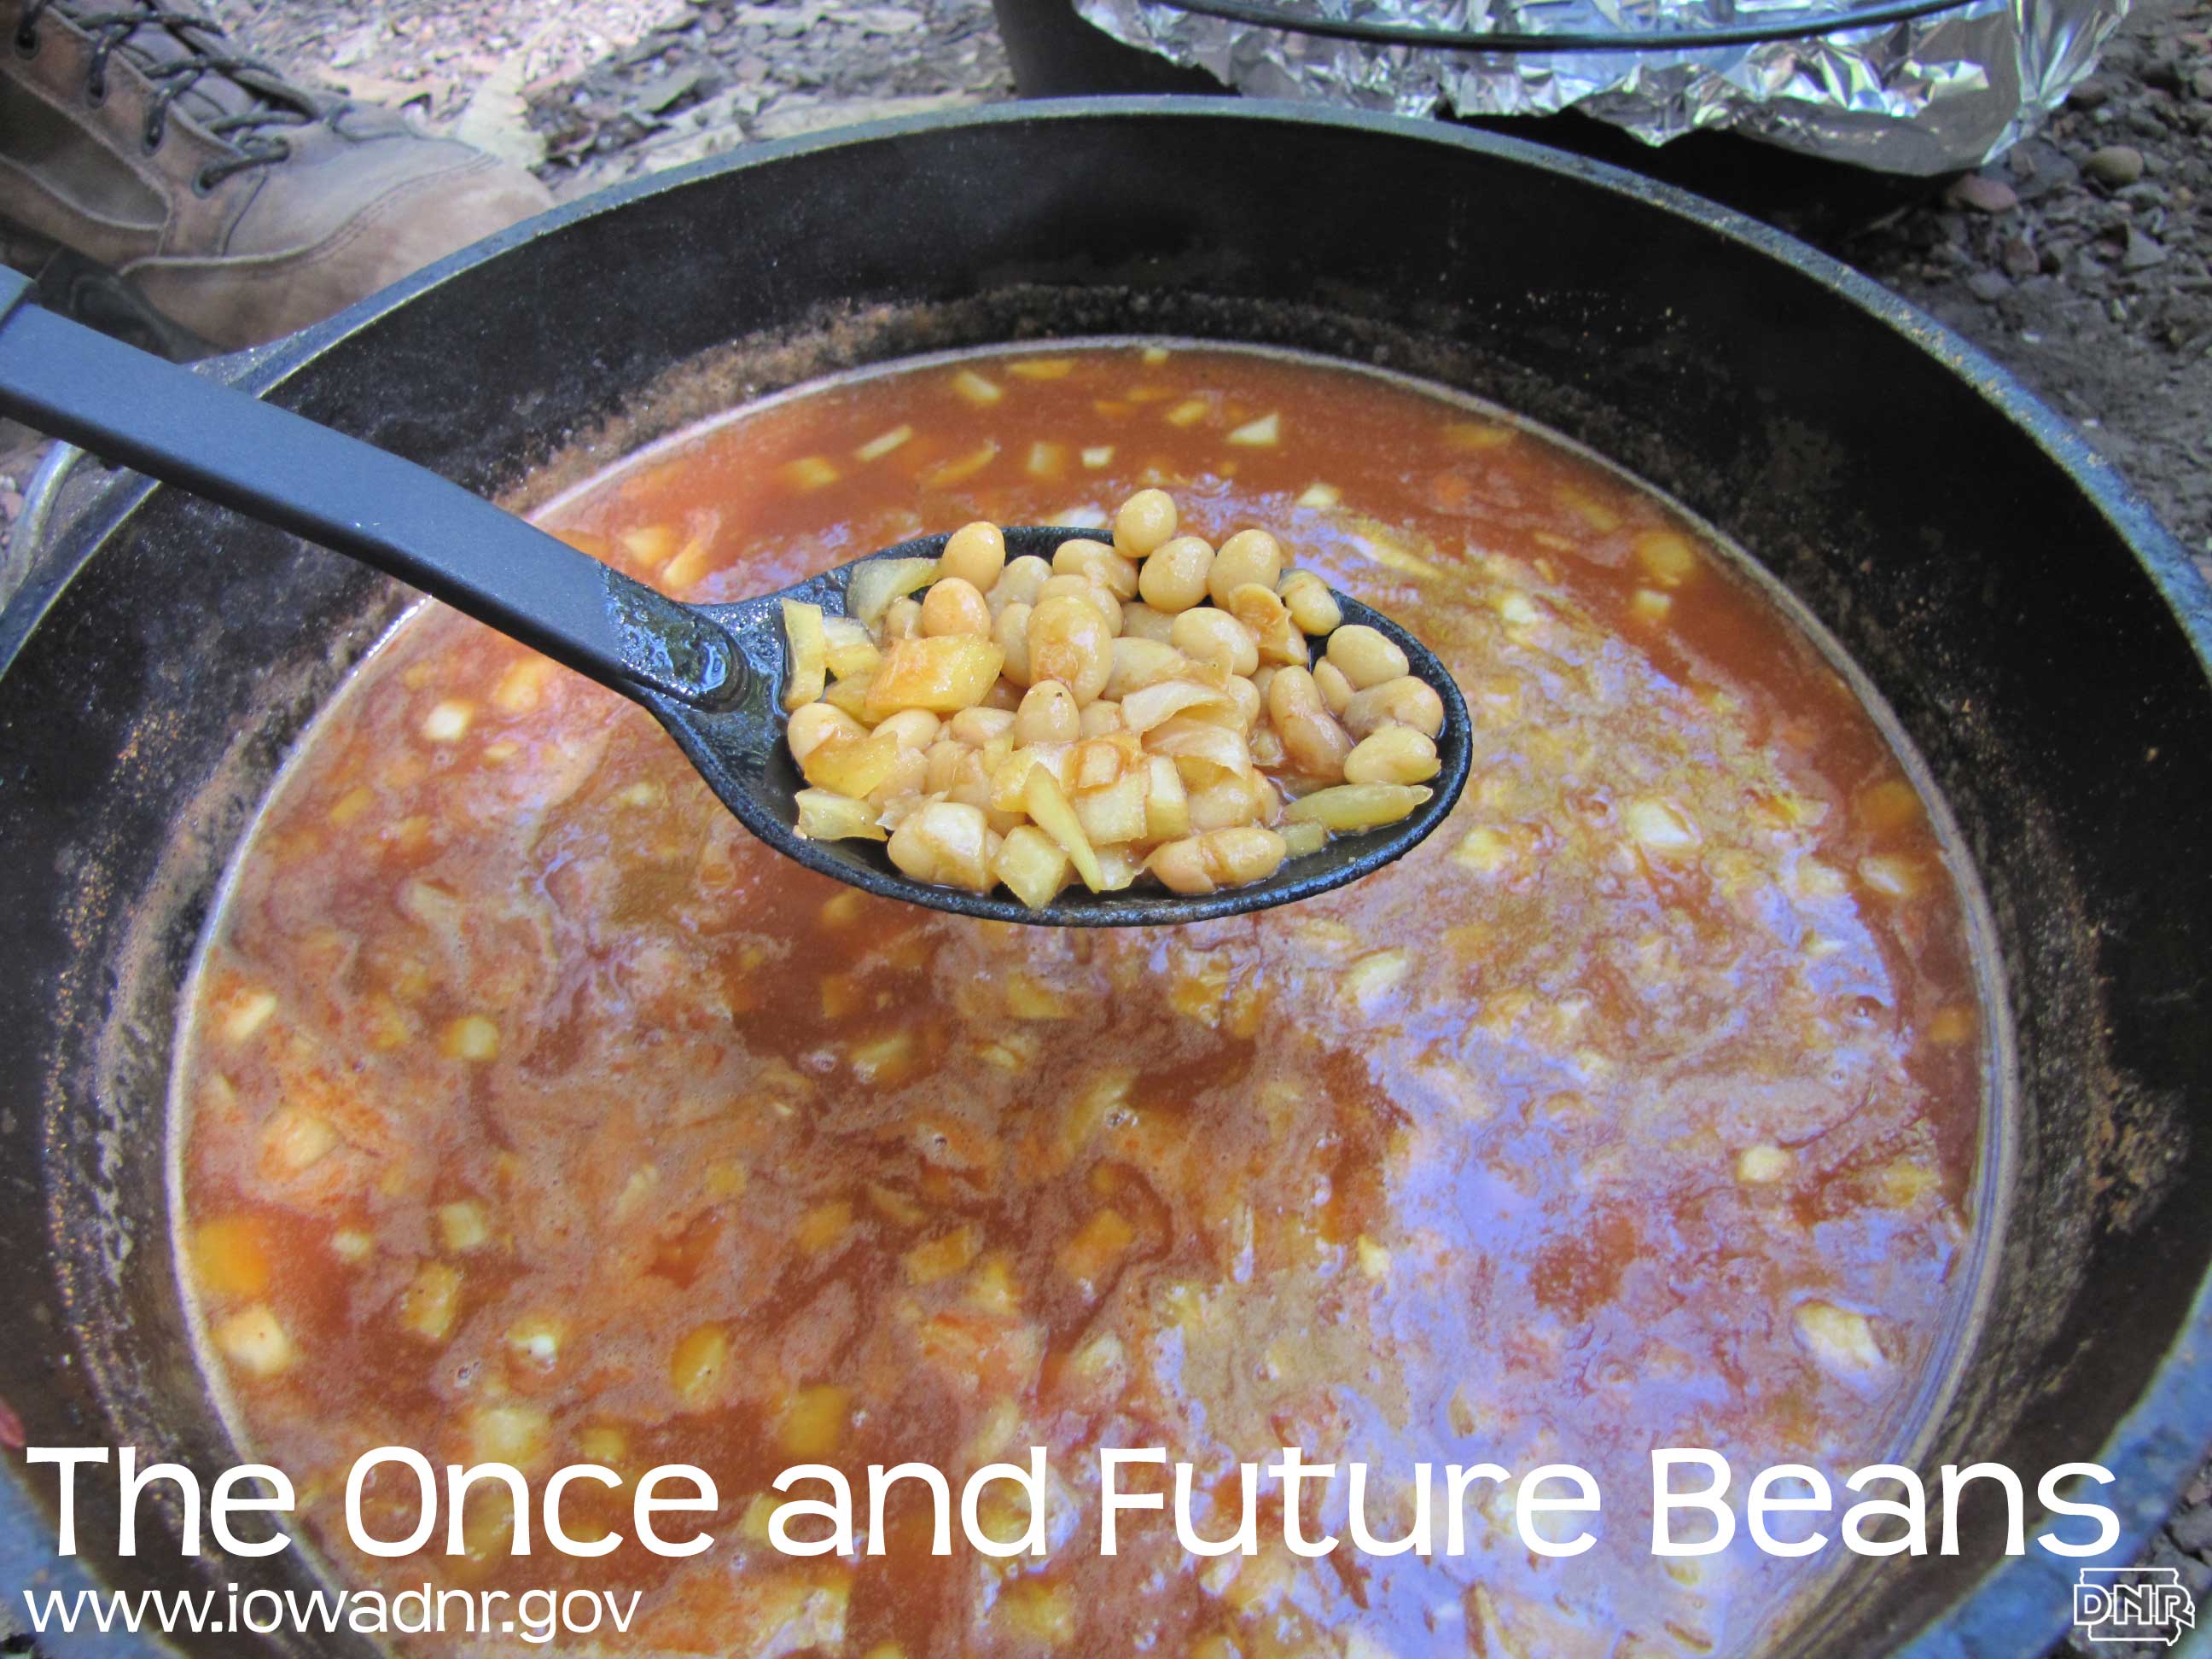 Dutch oven recipes from the Iowa DNR: The Once and Future Beans